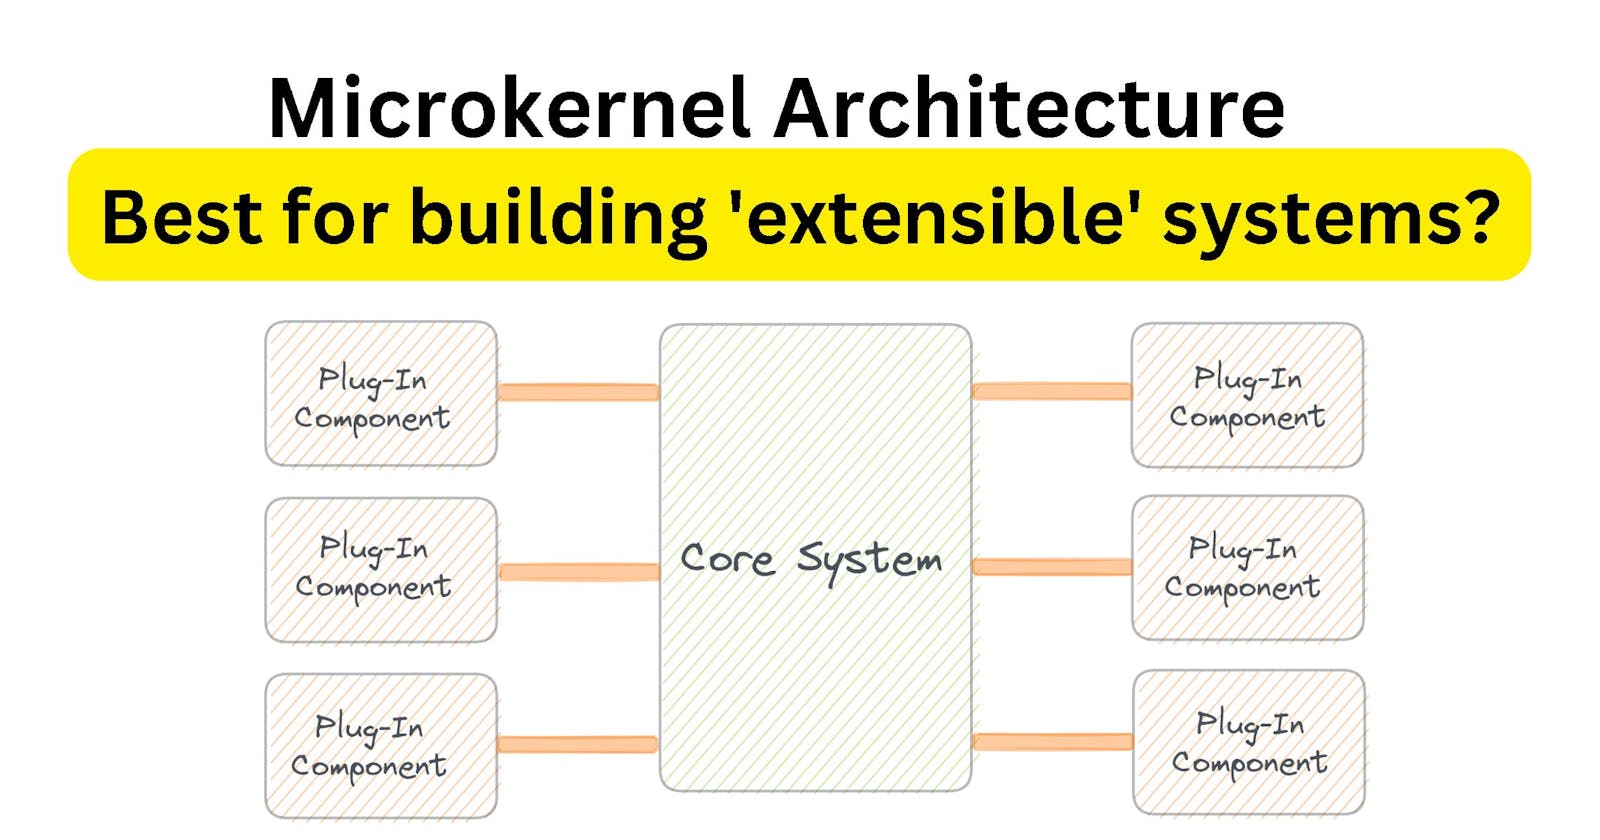 Microkernel Architecture: How It Works and What It Offers